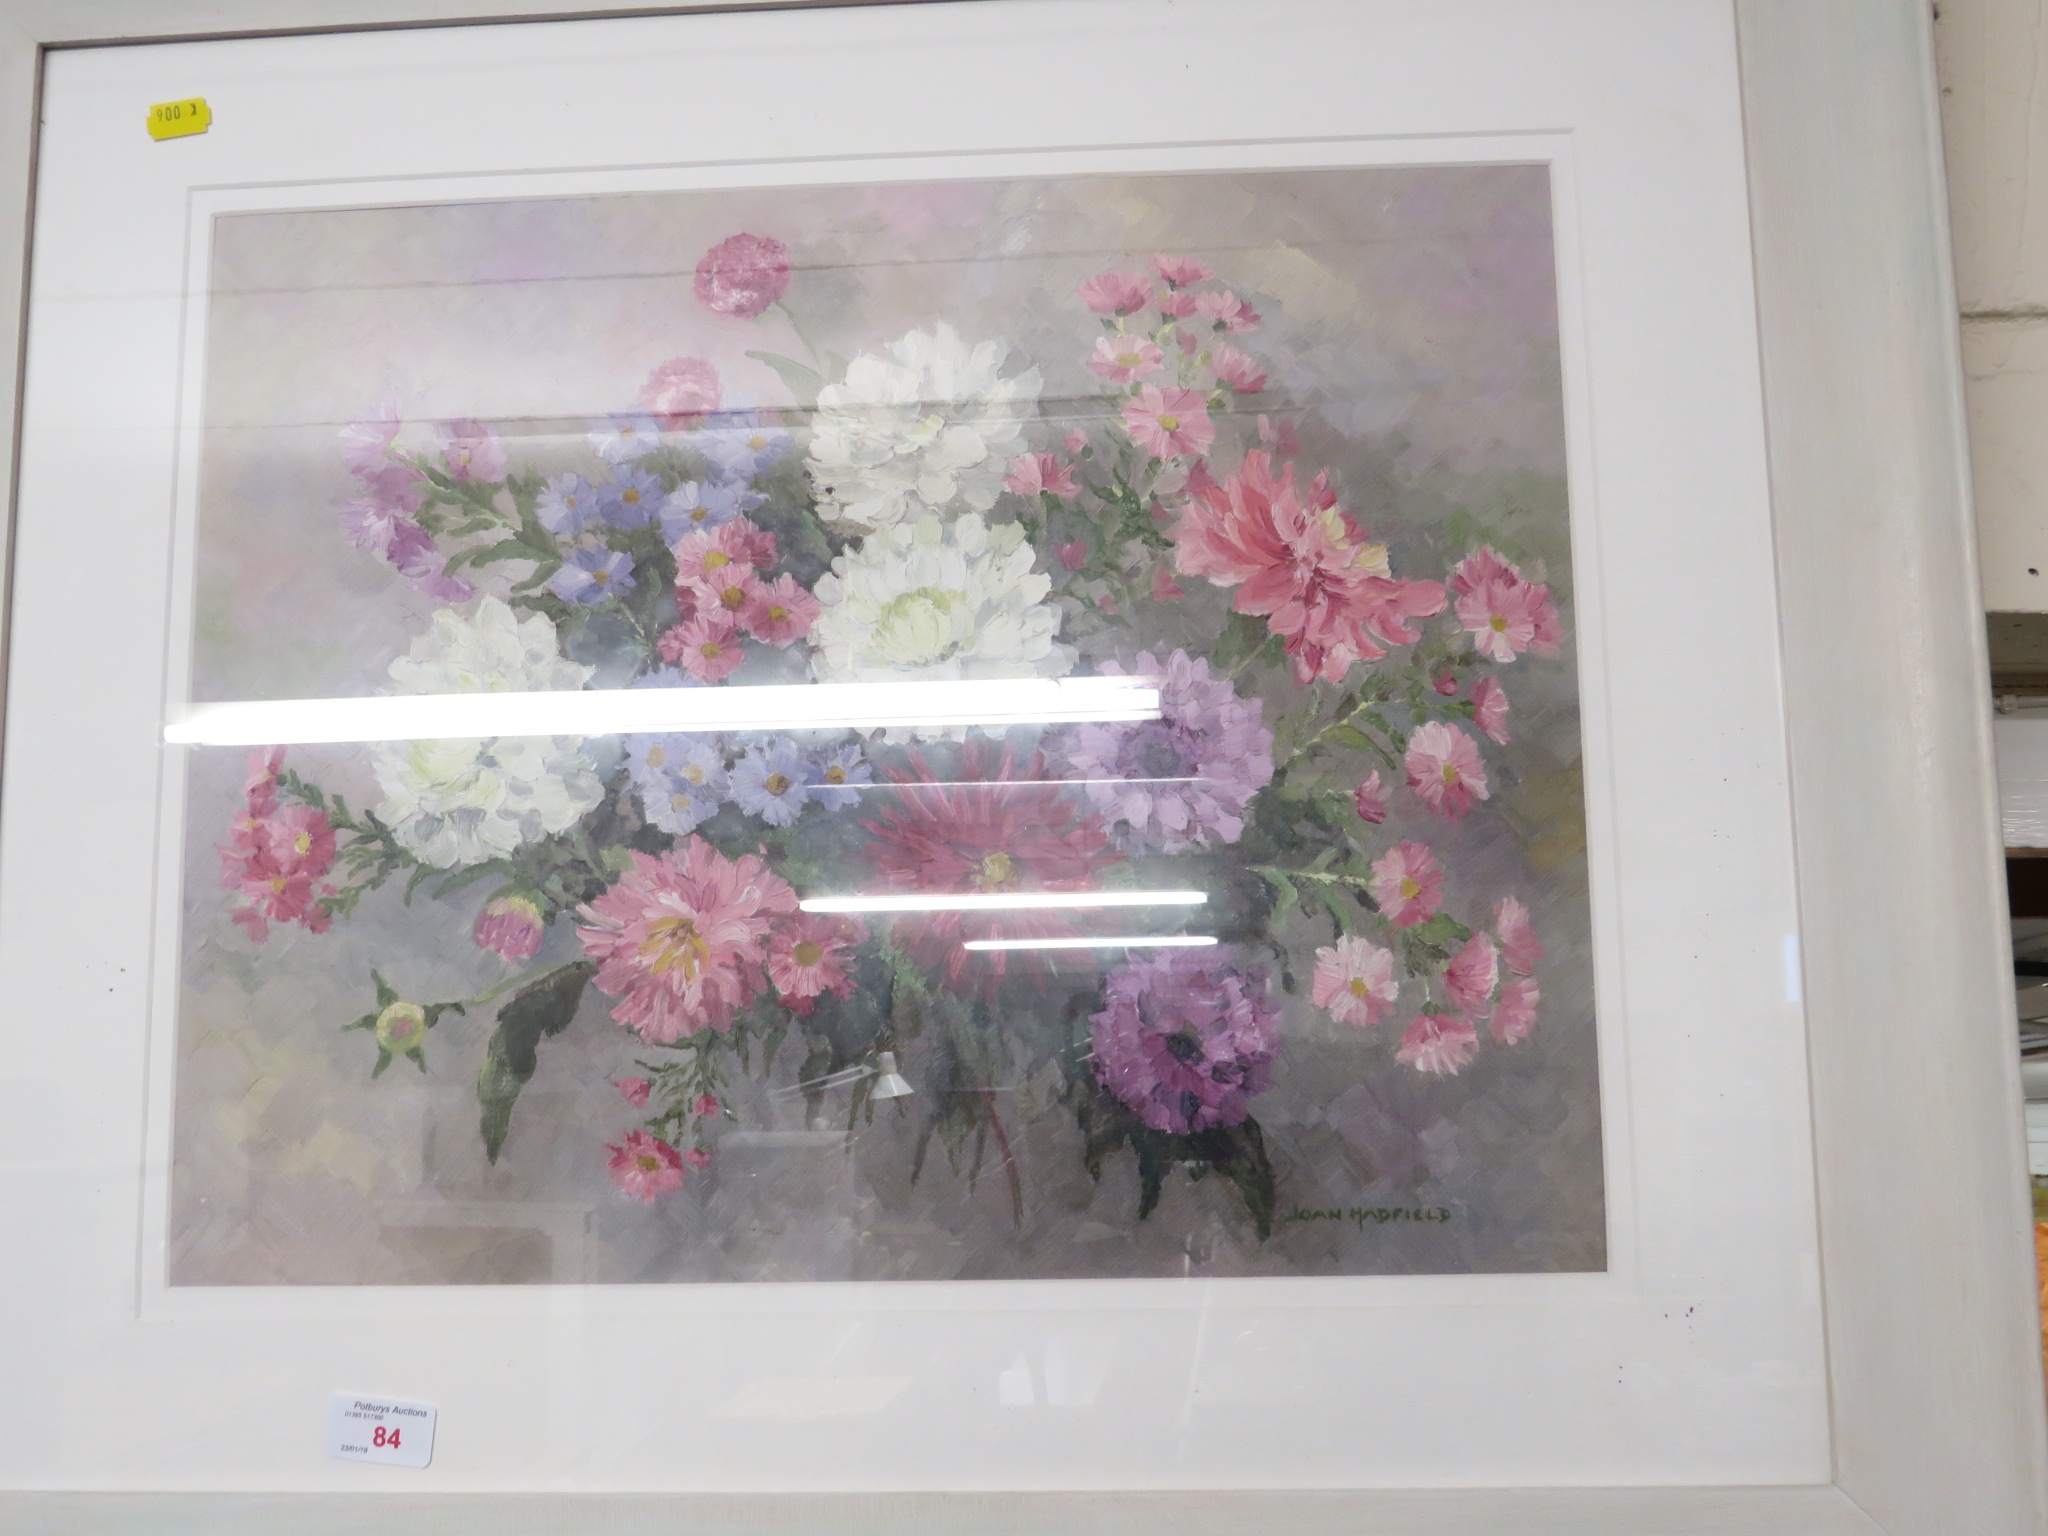 FRAMED AND GLAZED STILL LIFT PAINTING OF FLOWERS SIGNED LOWER RIGHT JOAN HADFIELD